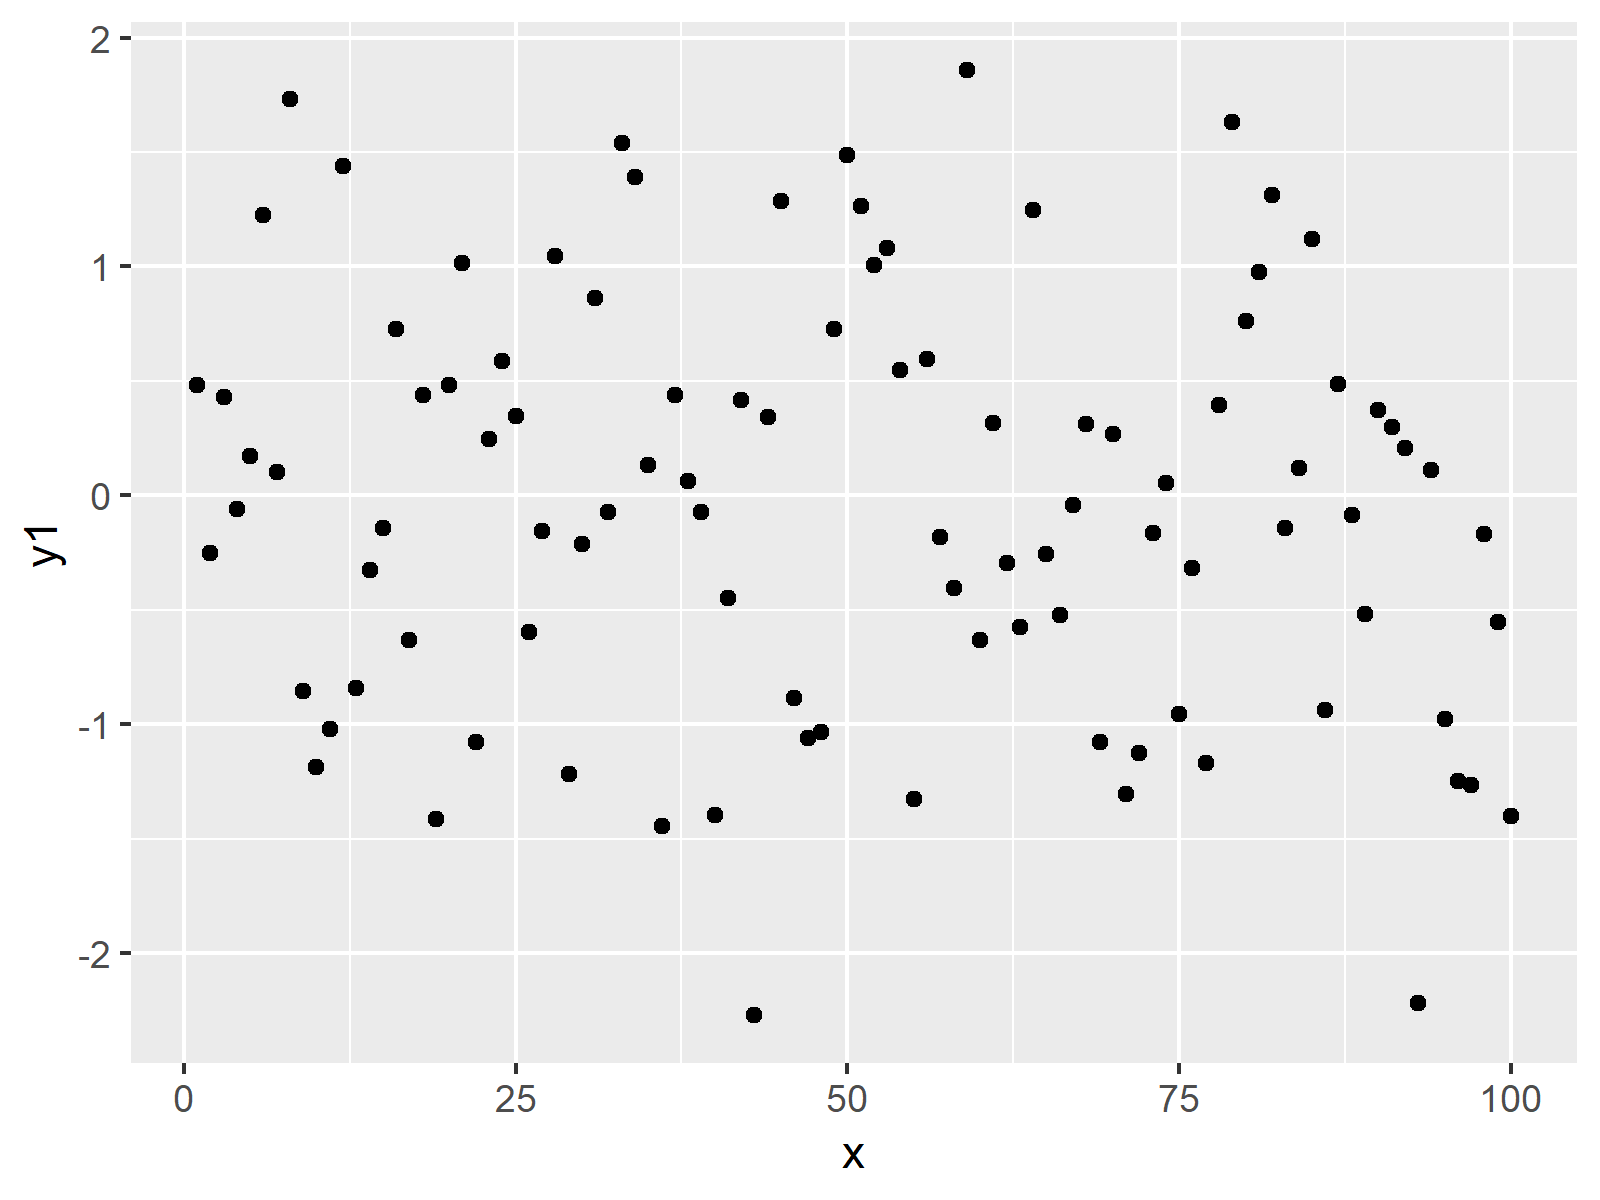 scatterplot created by ggplot2 package in r